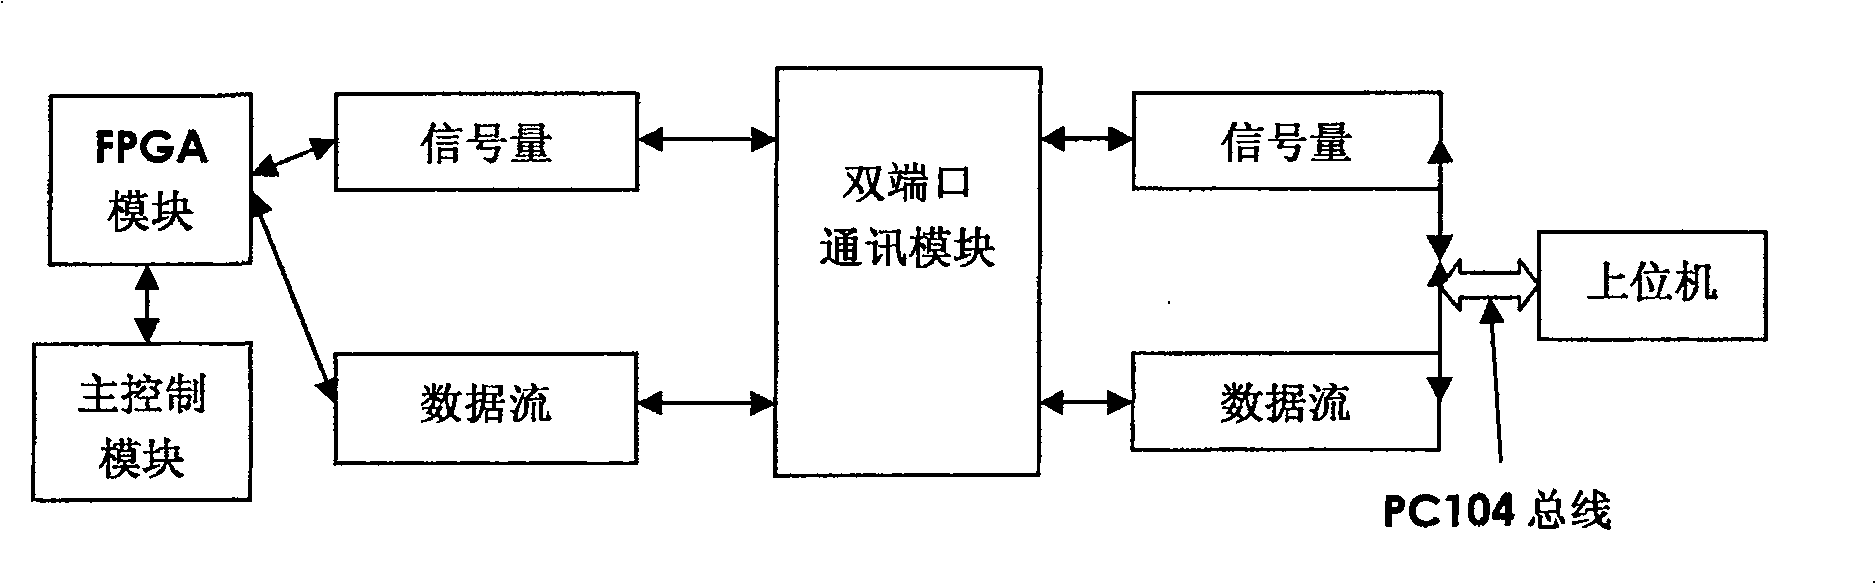 Embedded movement control card based on ARM